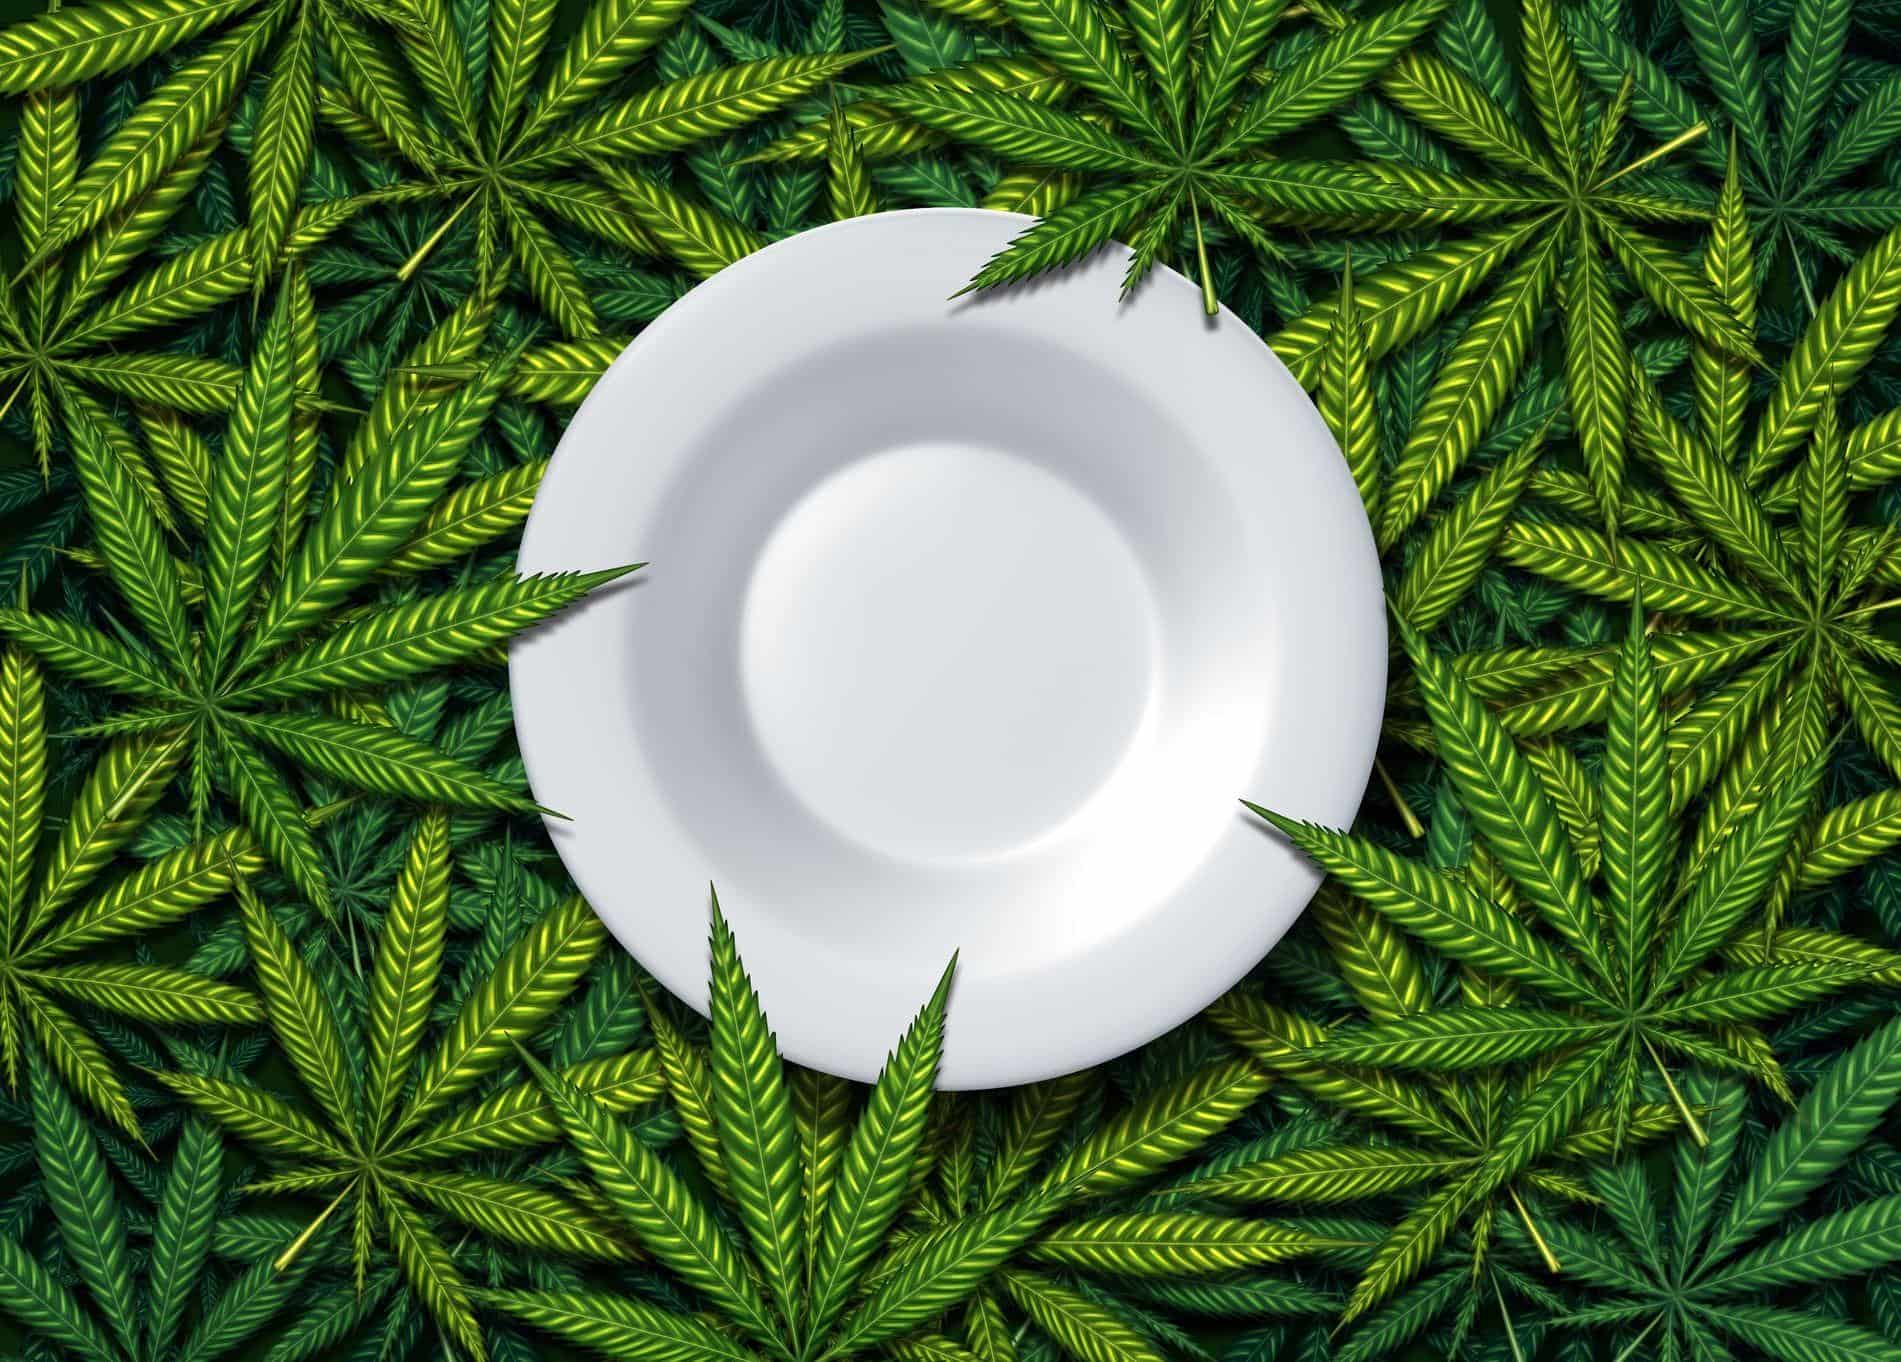 Edibles Weed: Beginner's Guide On How To Get High